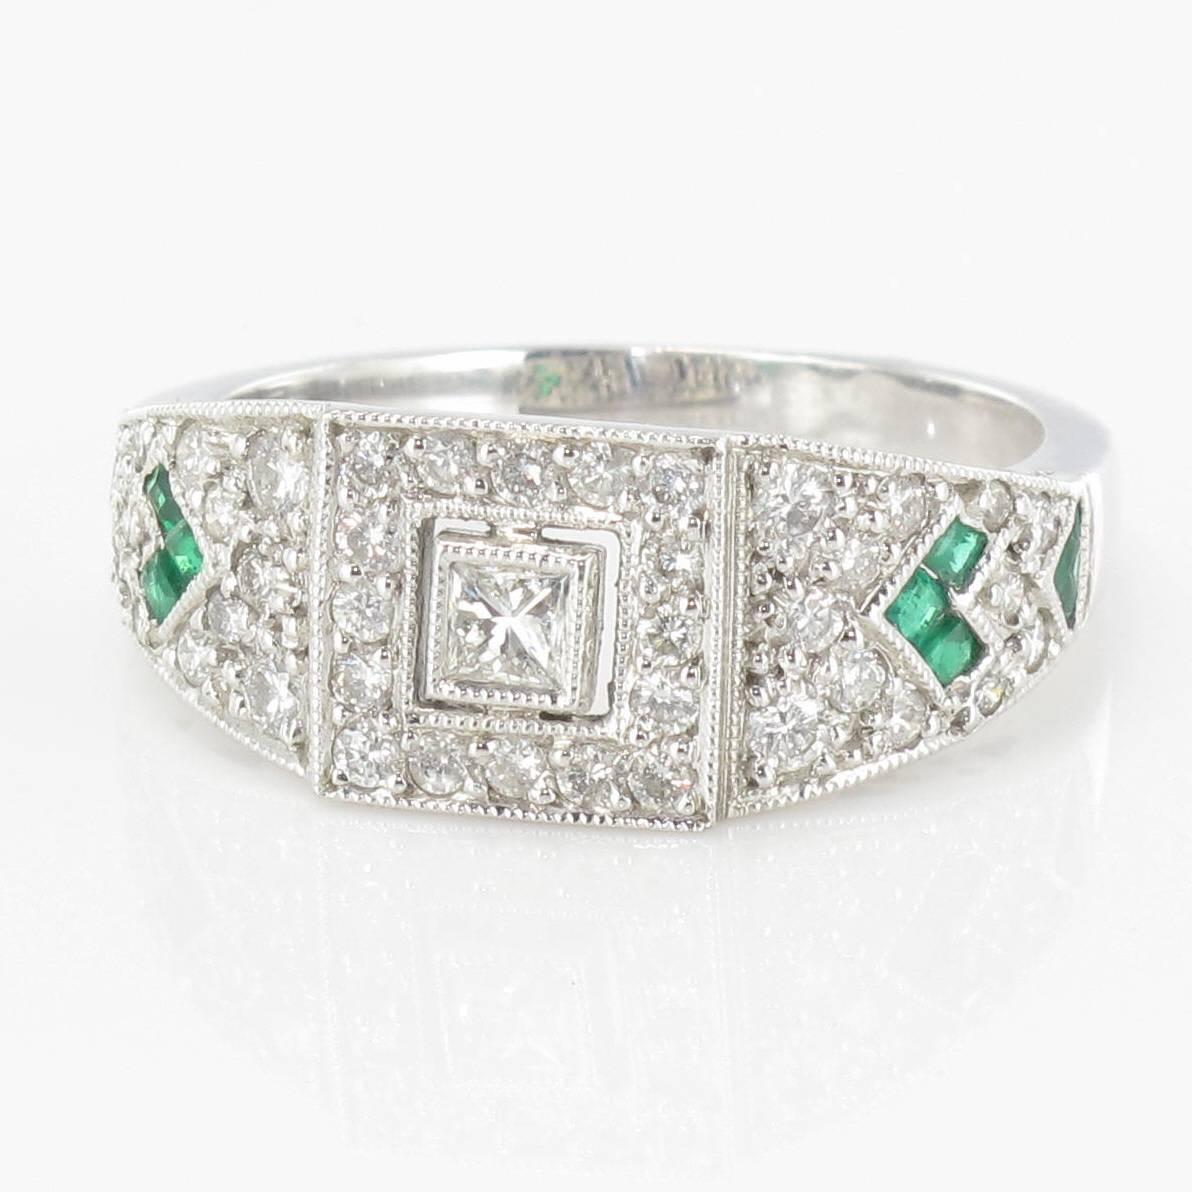 Ring in 18 carat white gold, eagle head hallmark. 

Set with a central princess cut bezel set diamond with a brilliant cut diamond surround, set on each side with diamonds and emeralds. 

Total diamond weight: about 0.50 carat 
Total emeralds